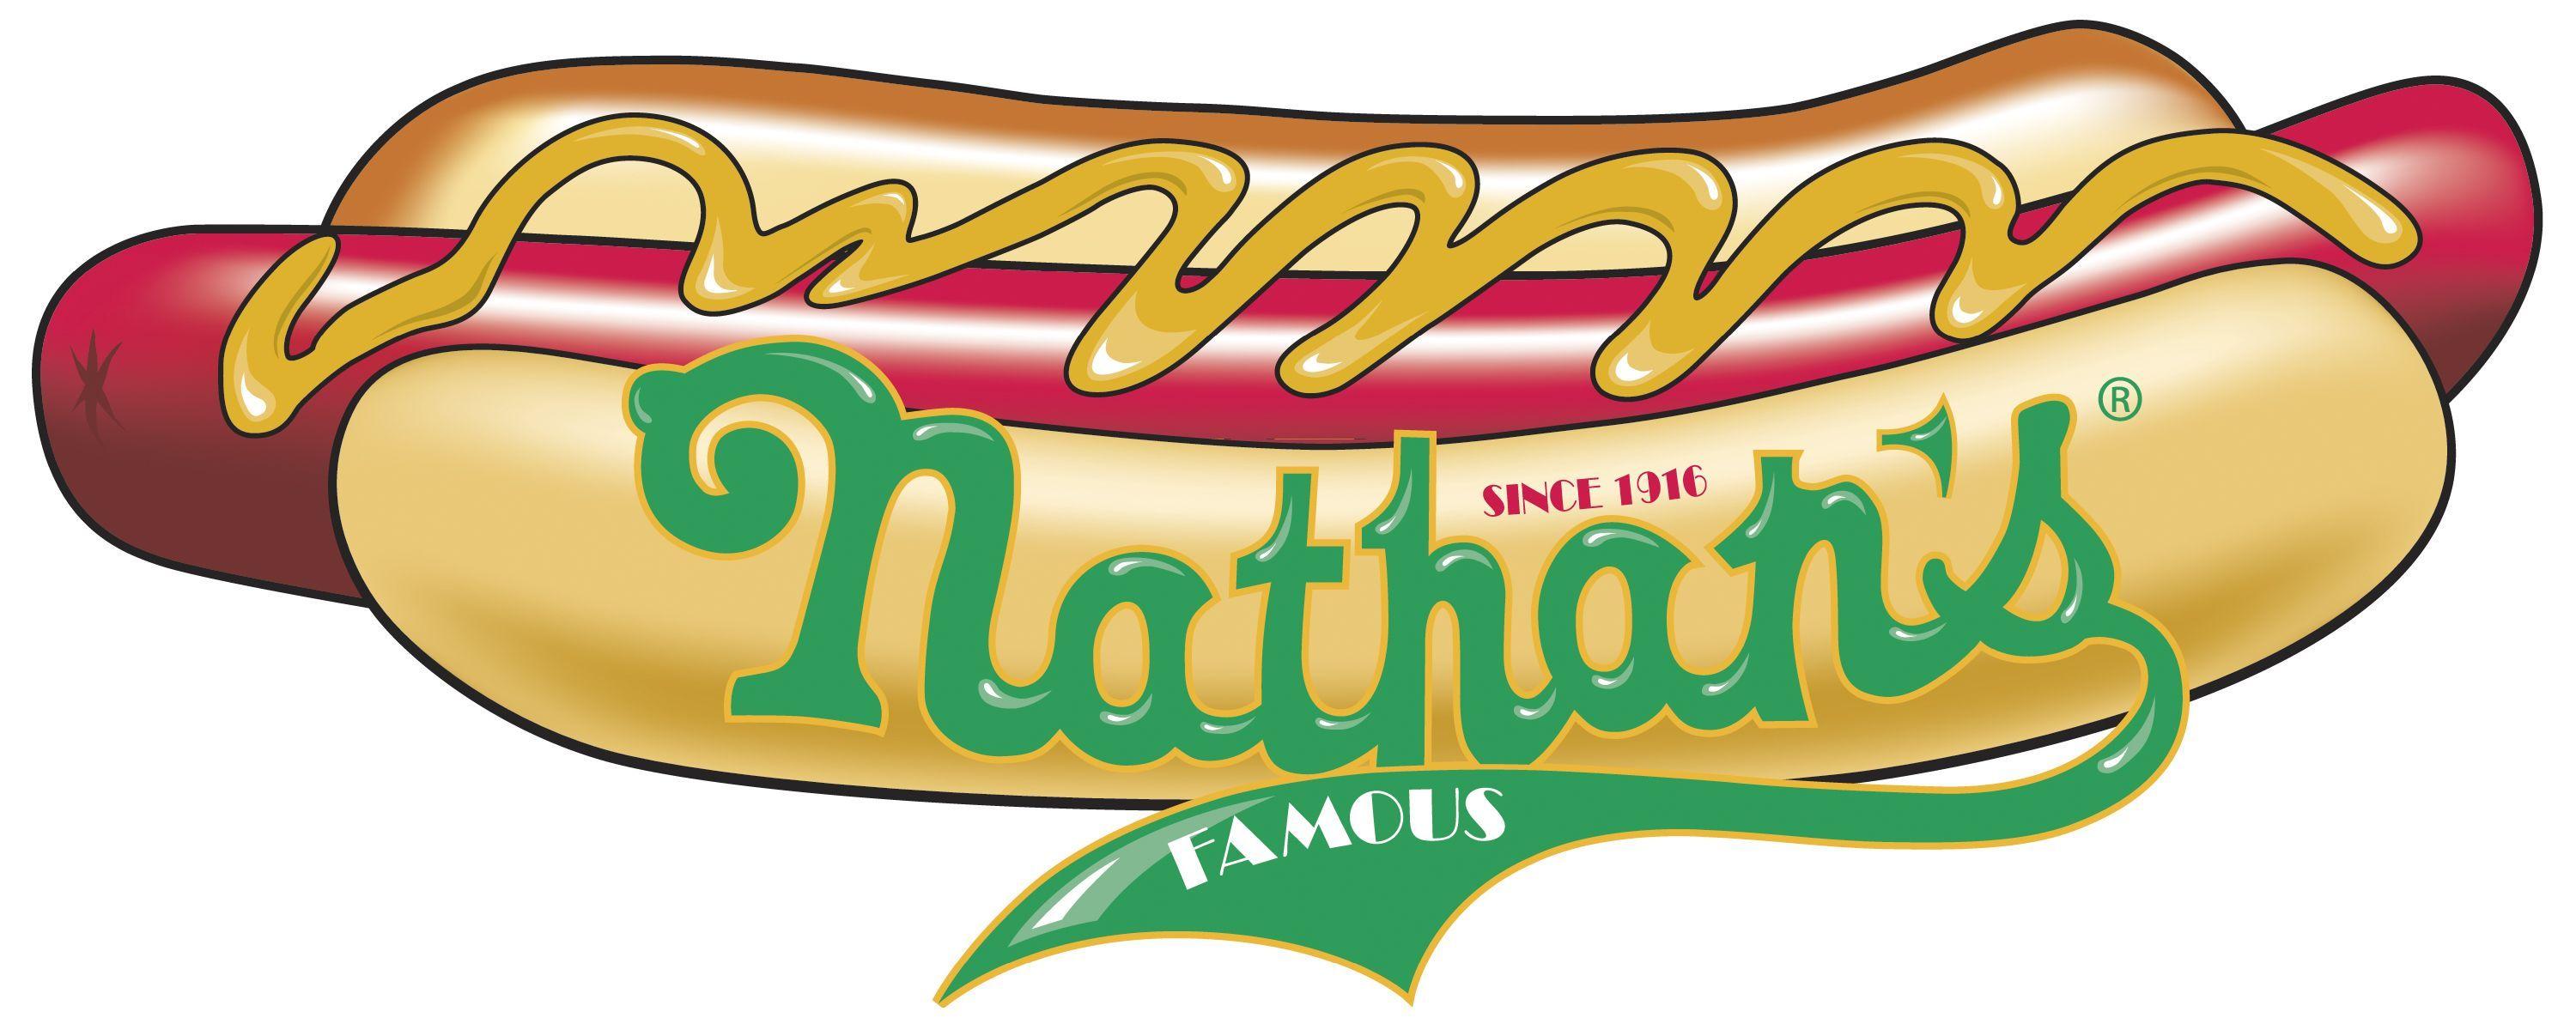 Nathan's Logo - The Nathan's Famous hot dog logo is pretty straightforward, they ...